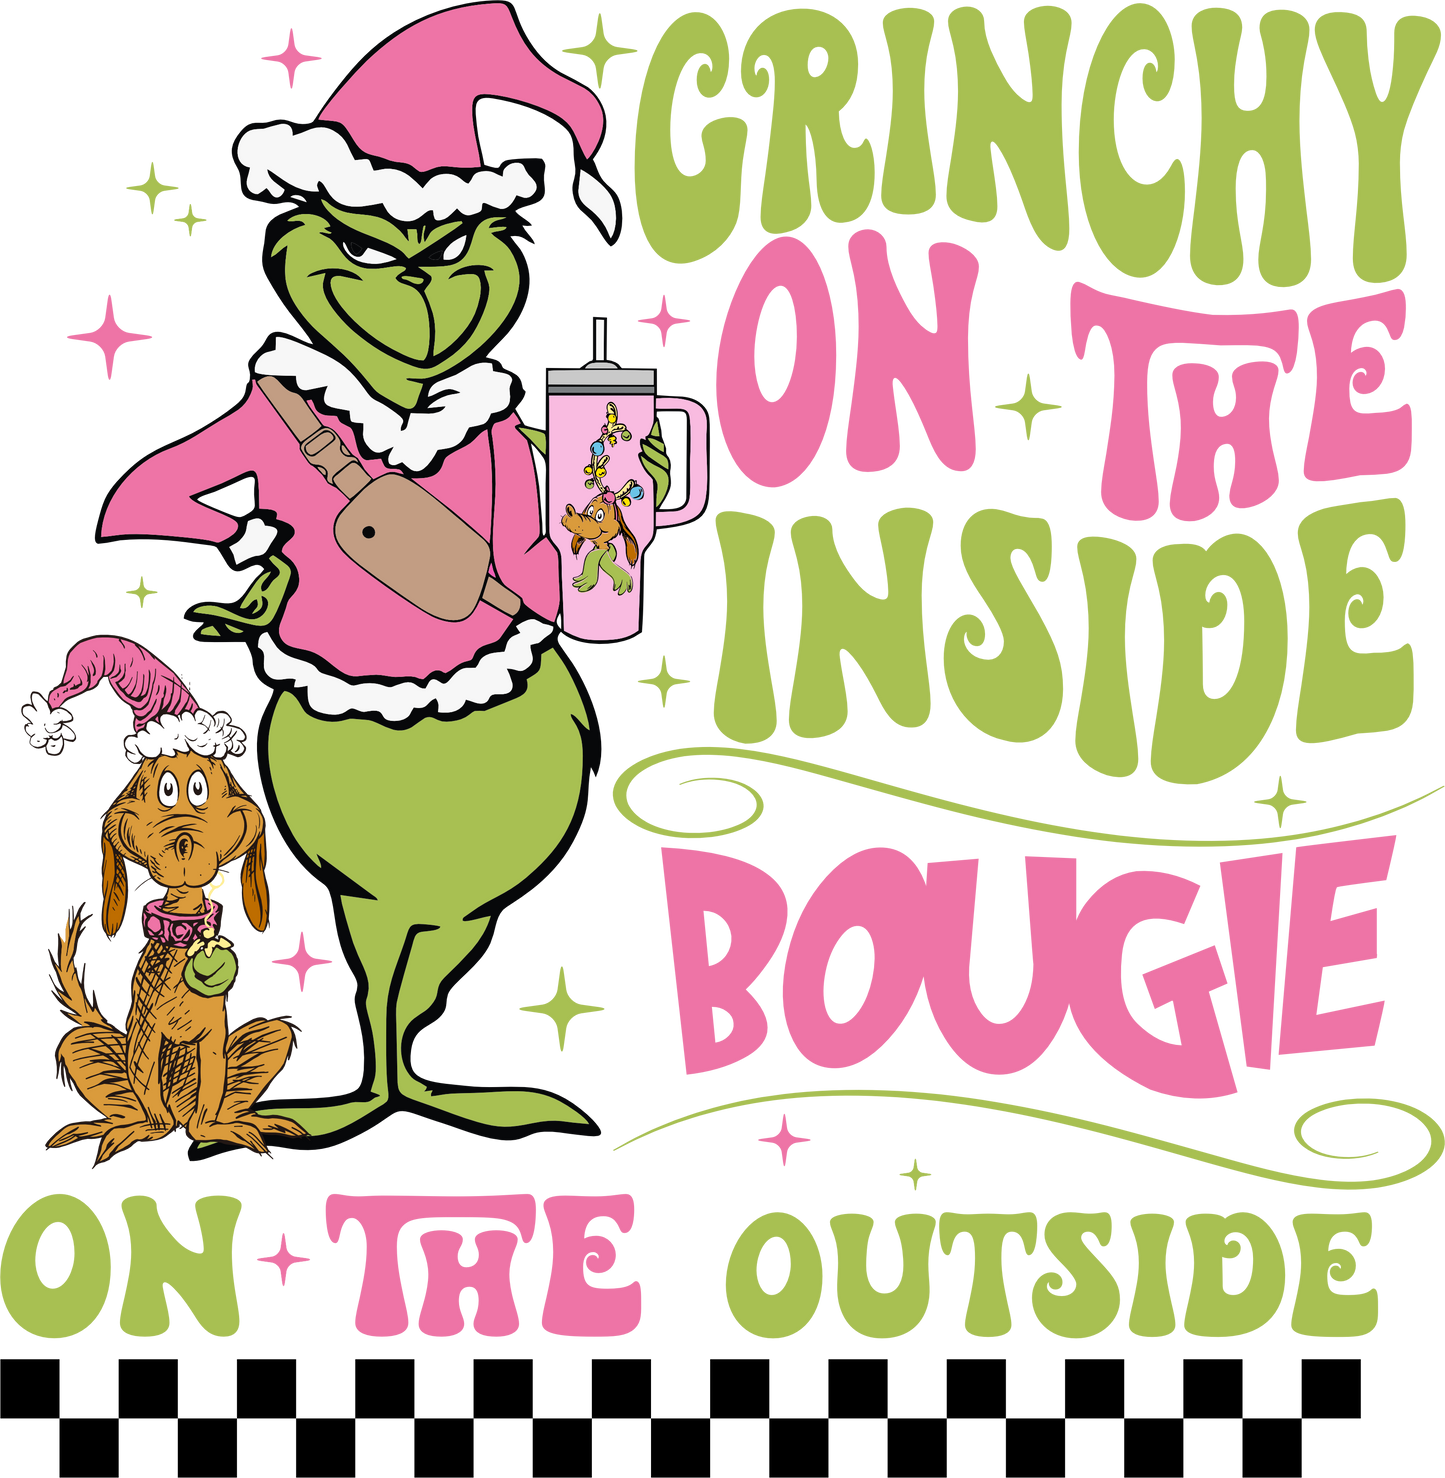 GRINCHY ON THE INSIDE